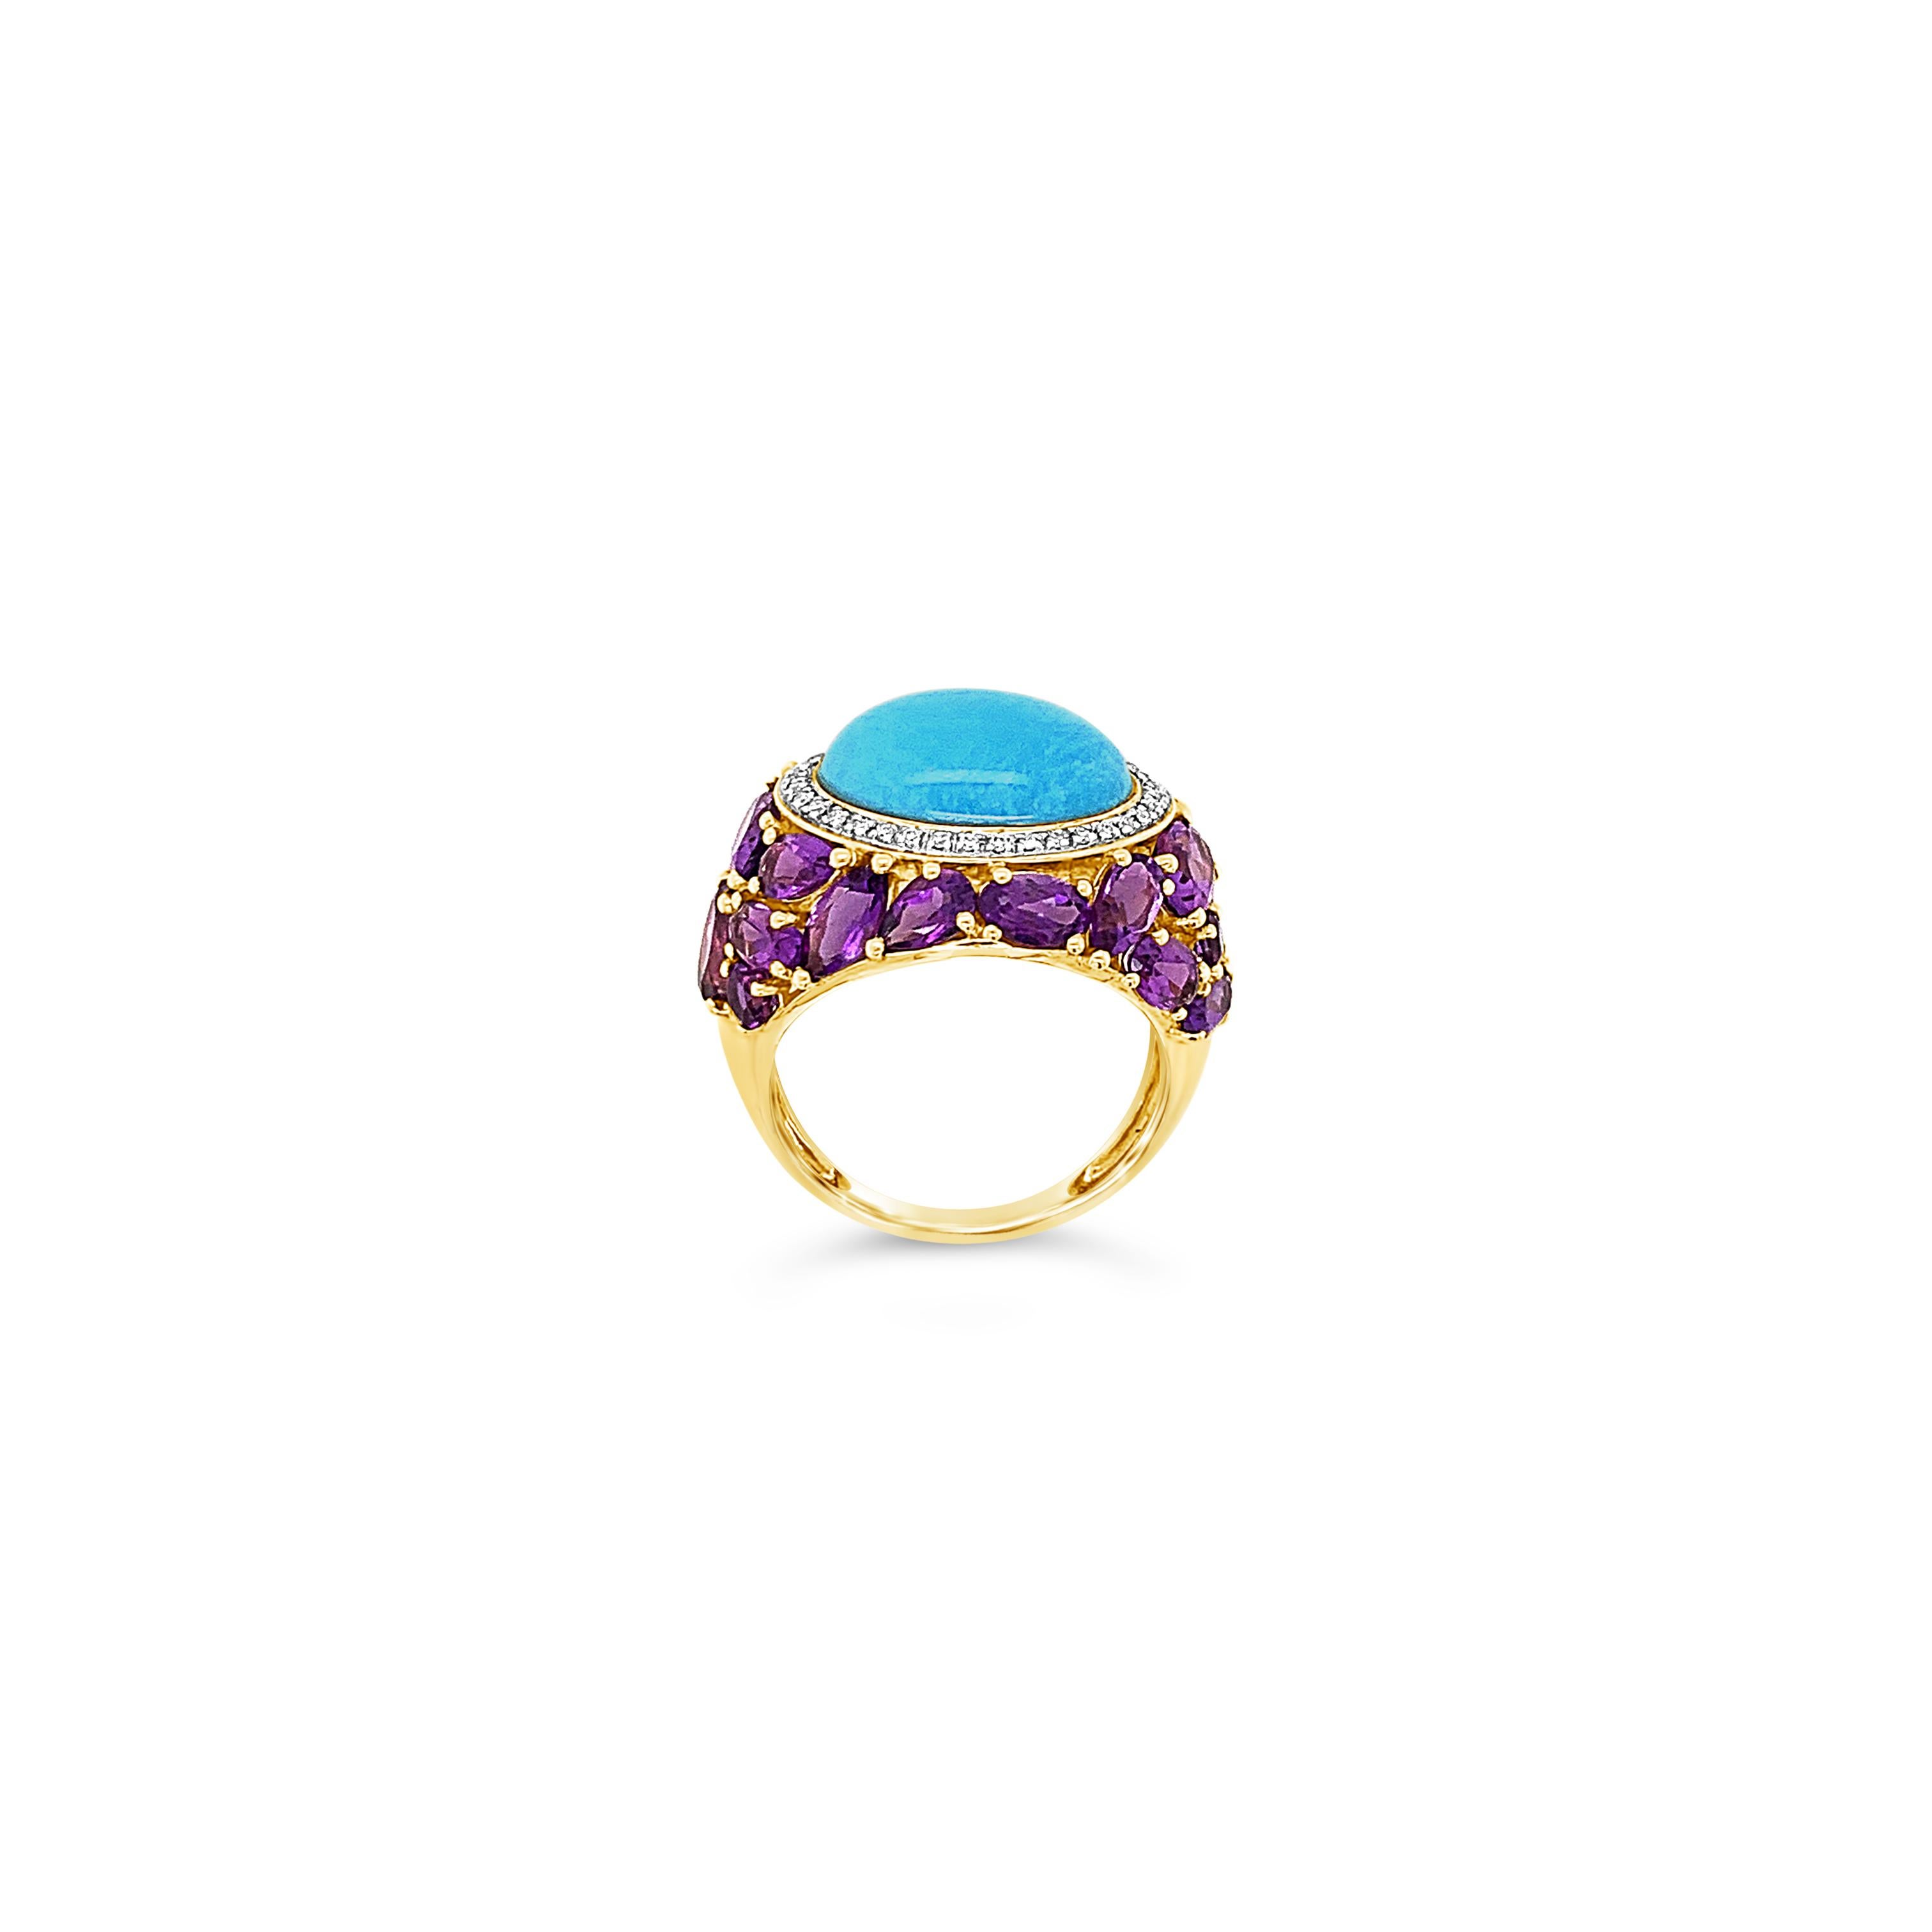 Carlo Viani® Ring featuring 4 1/2 cts. Grape Amethyst™, Robins Egg Blue Turquoise™, 1/8 cts. Vanilla Diamonds® set in 14K Honey Gold™

Diamonds Breakdown:
1/8 cts White Diamonds

Gems Breakdown:
14x11mm Turquoise
4 1/2 cts Amethyst

Please feel free